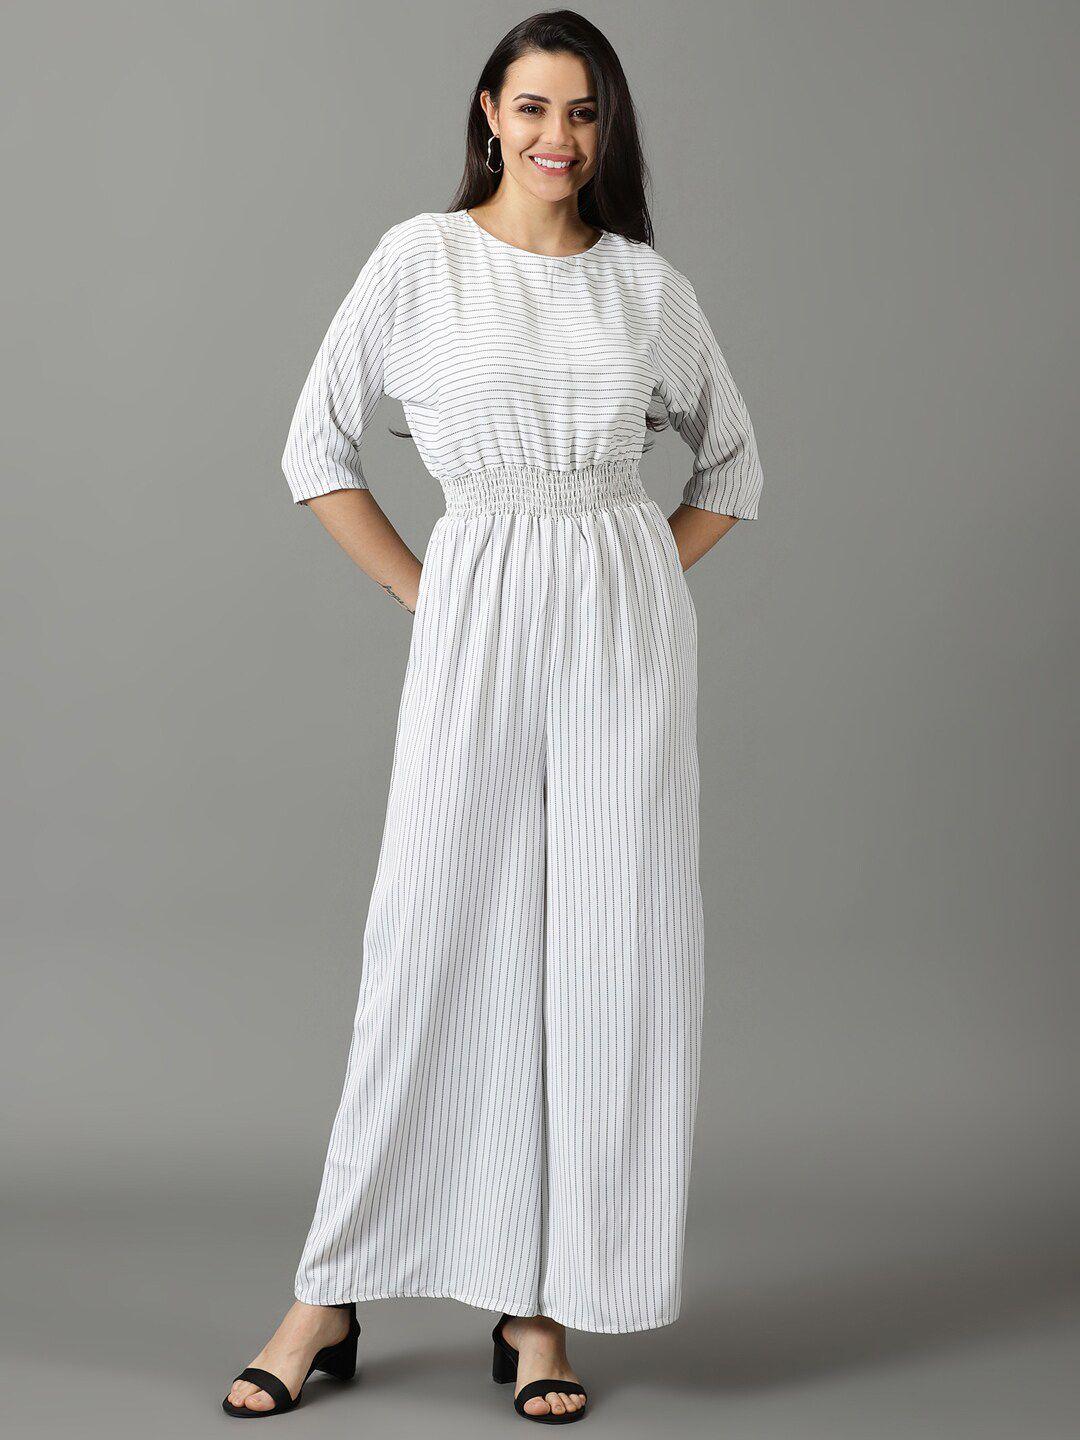 showoff striped culotte jumpsuit with smocking